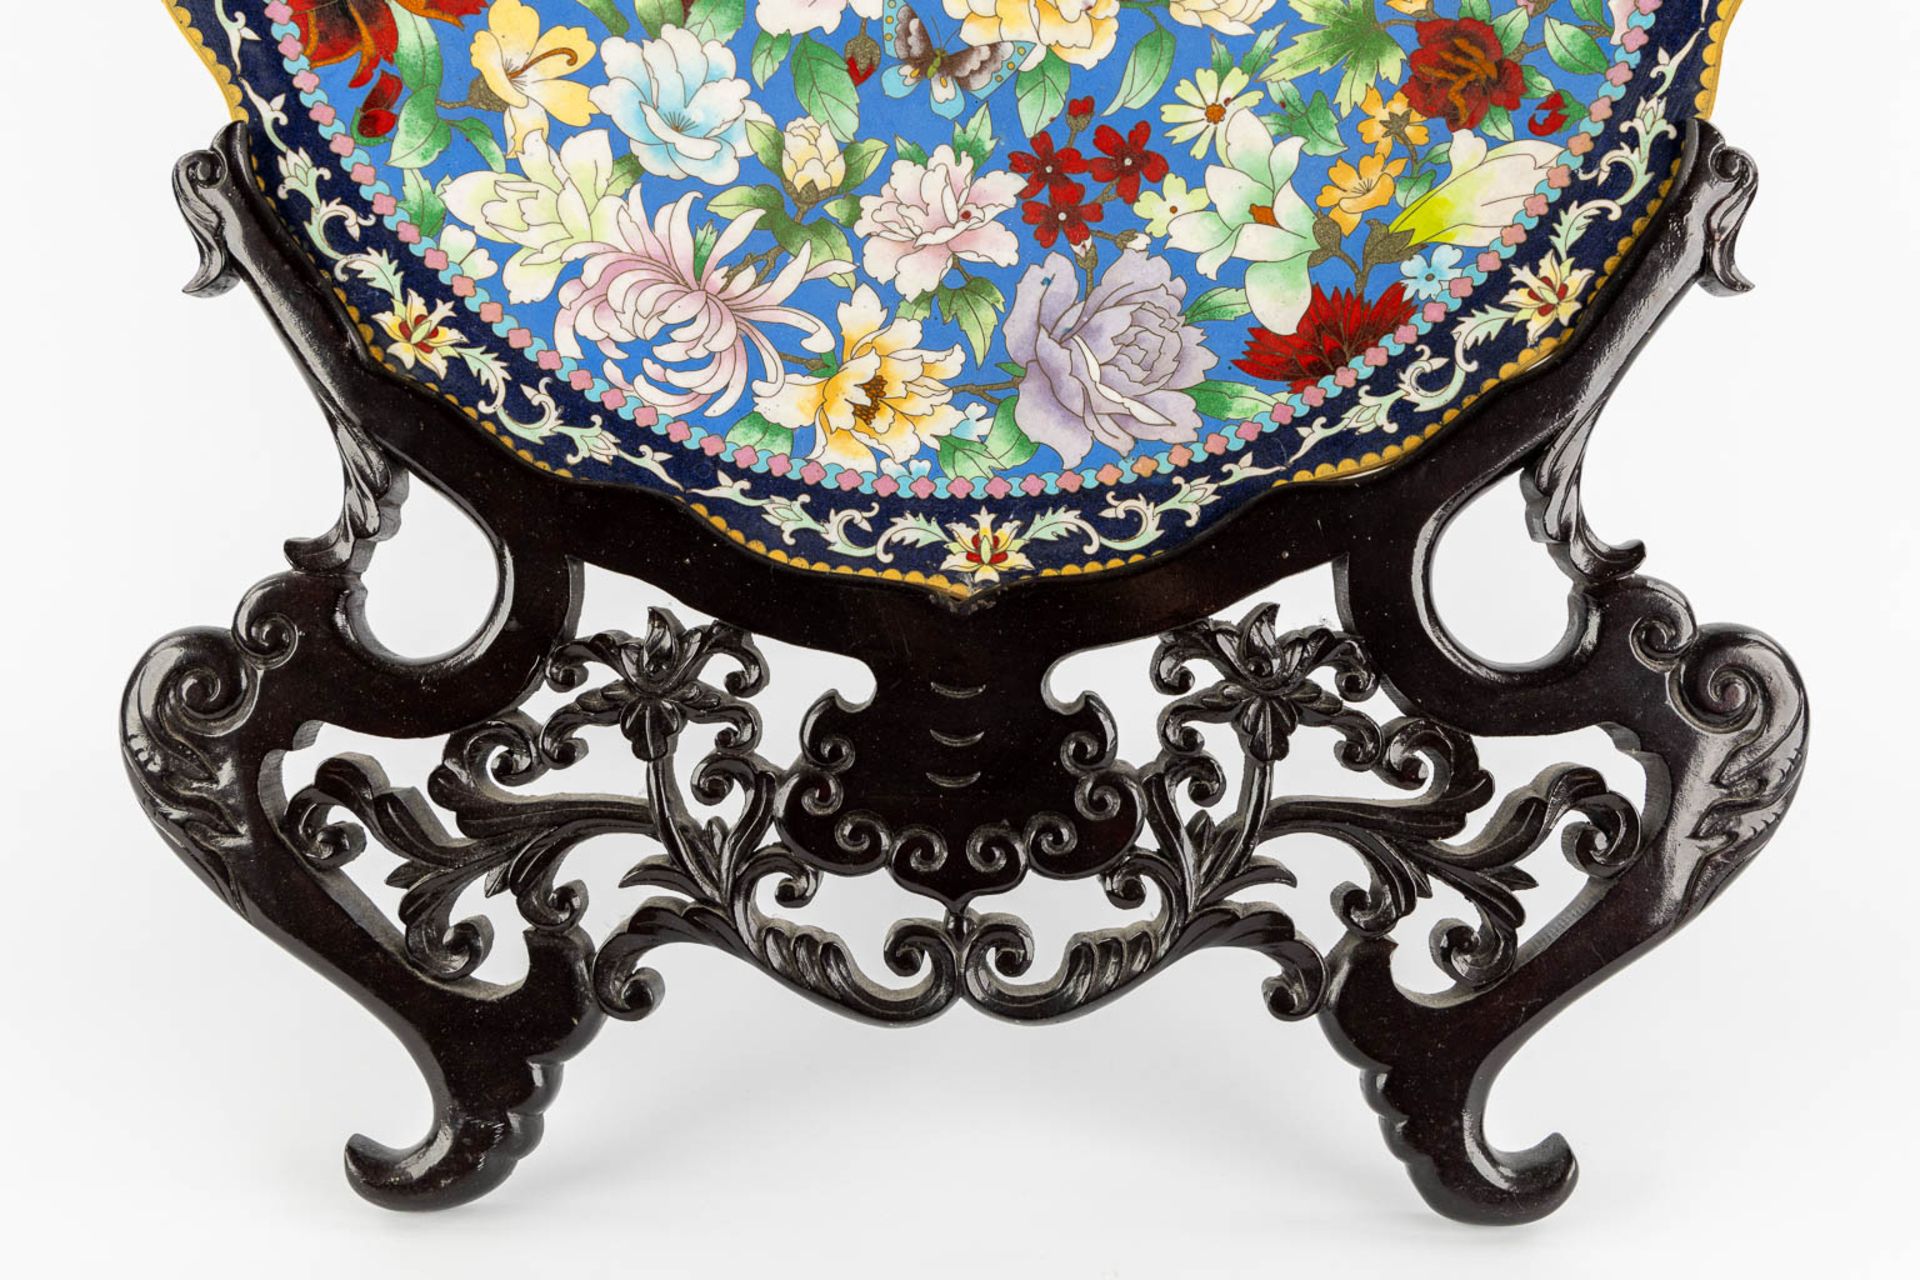 A large Chinese Cloisonné plate in an openworked sculptured wood stand. (W:51 x H:67 cm) - Image 10 of 12